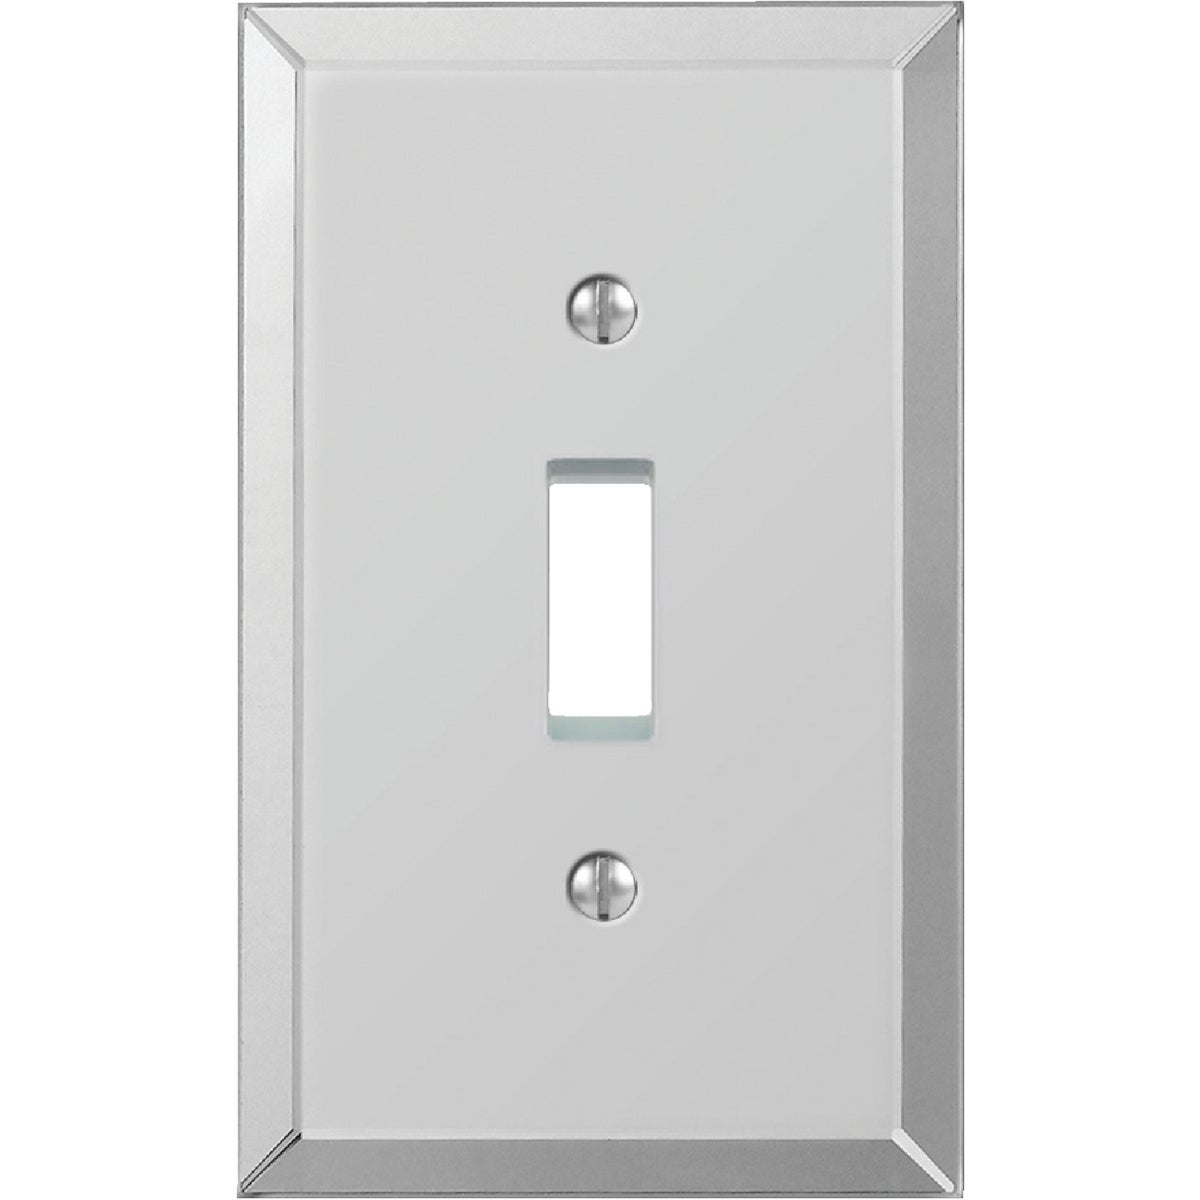 Item 526620, Acrylic beveled mirror, toggle switch wall plate.